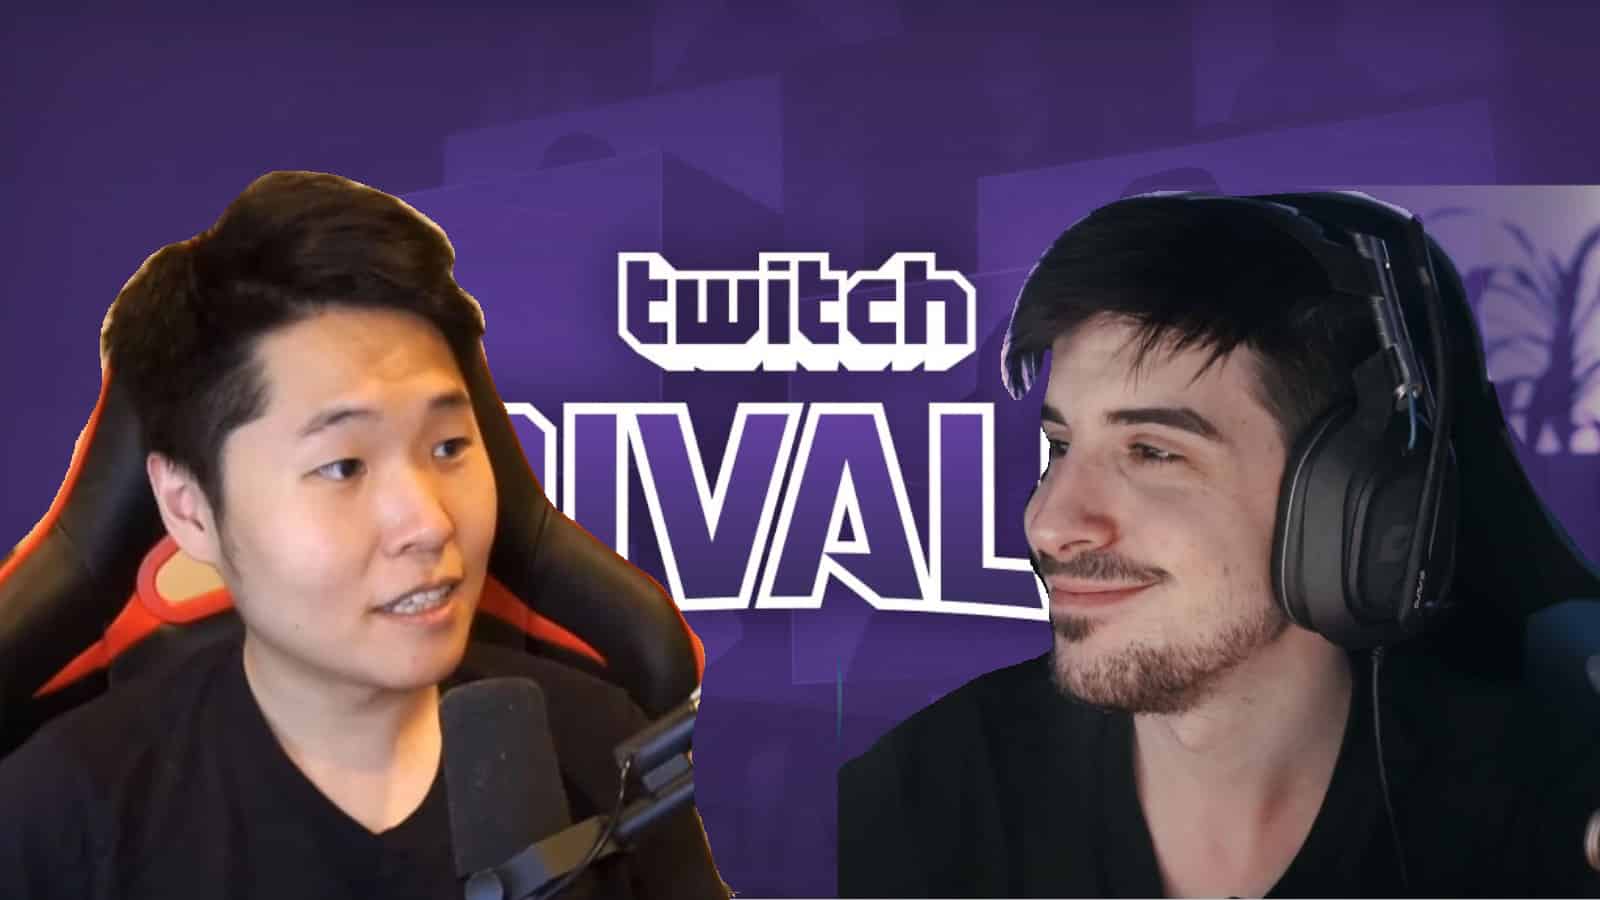 Twitch Rivals Rust Team Battle III - Viewership, Overview, Prize Pool